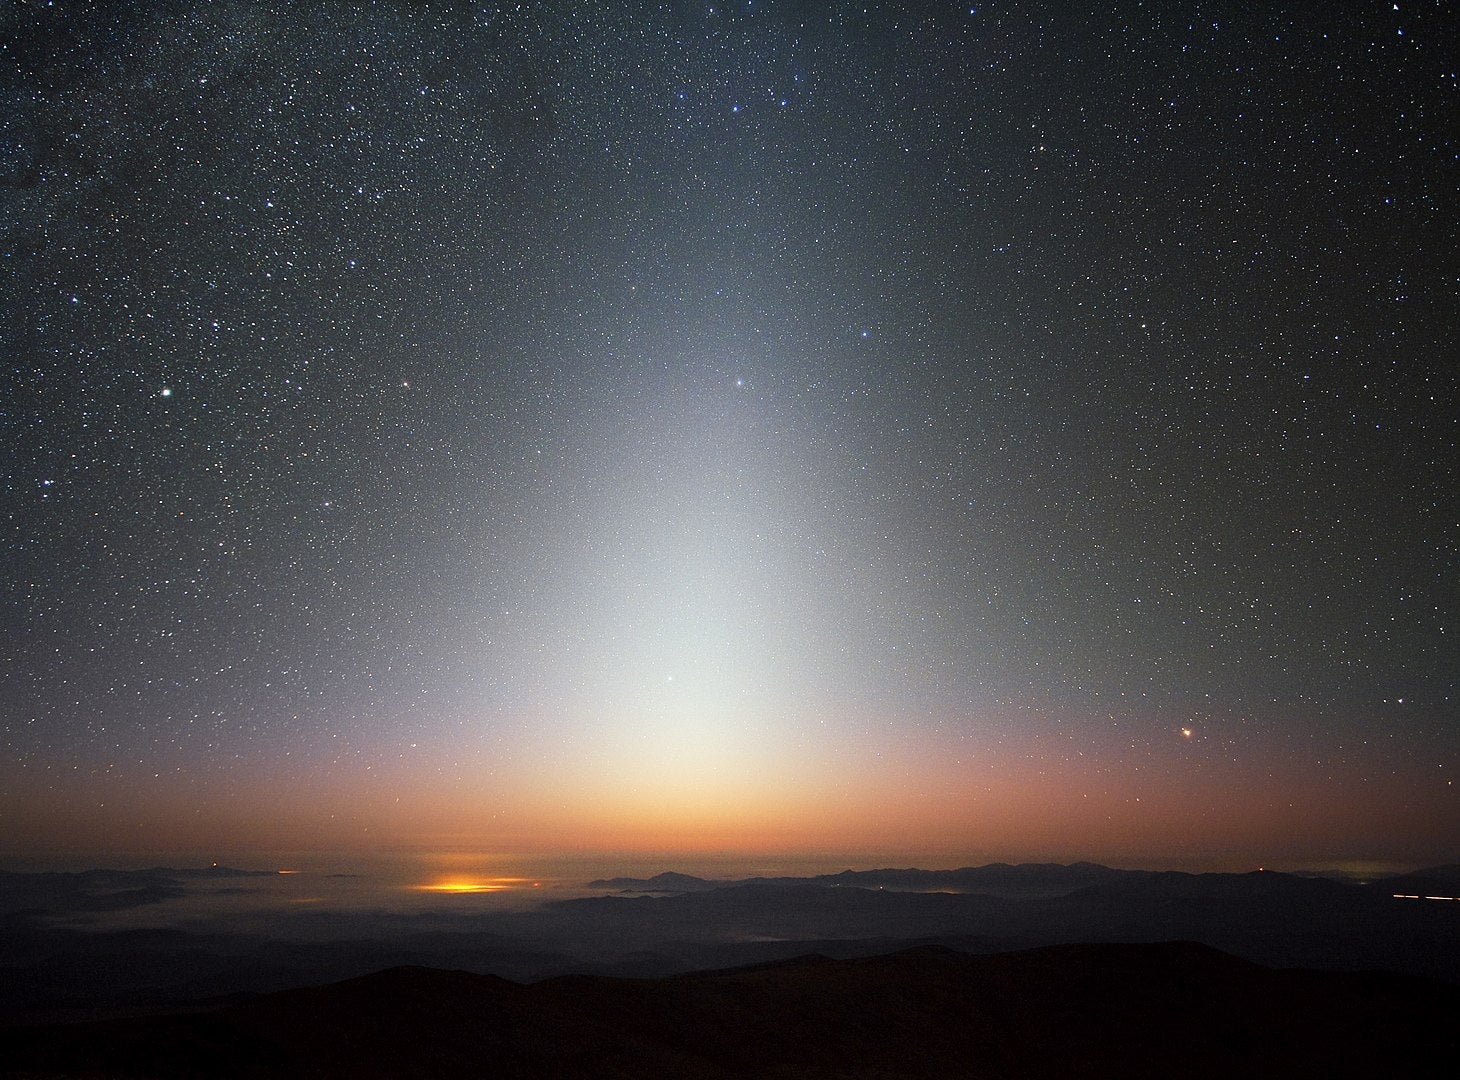 The false dawn is prominent in the autumn, while the evening zodiacal light is best seen right now, in springtime